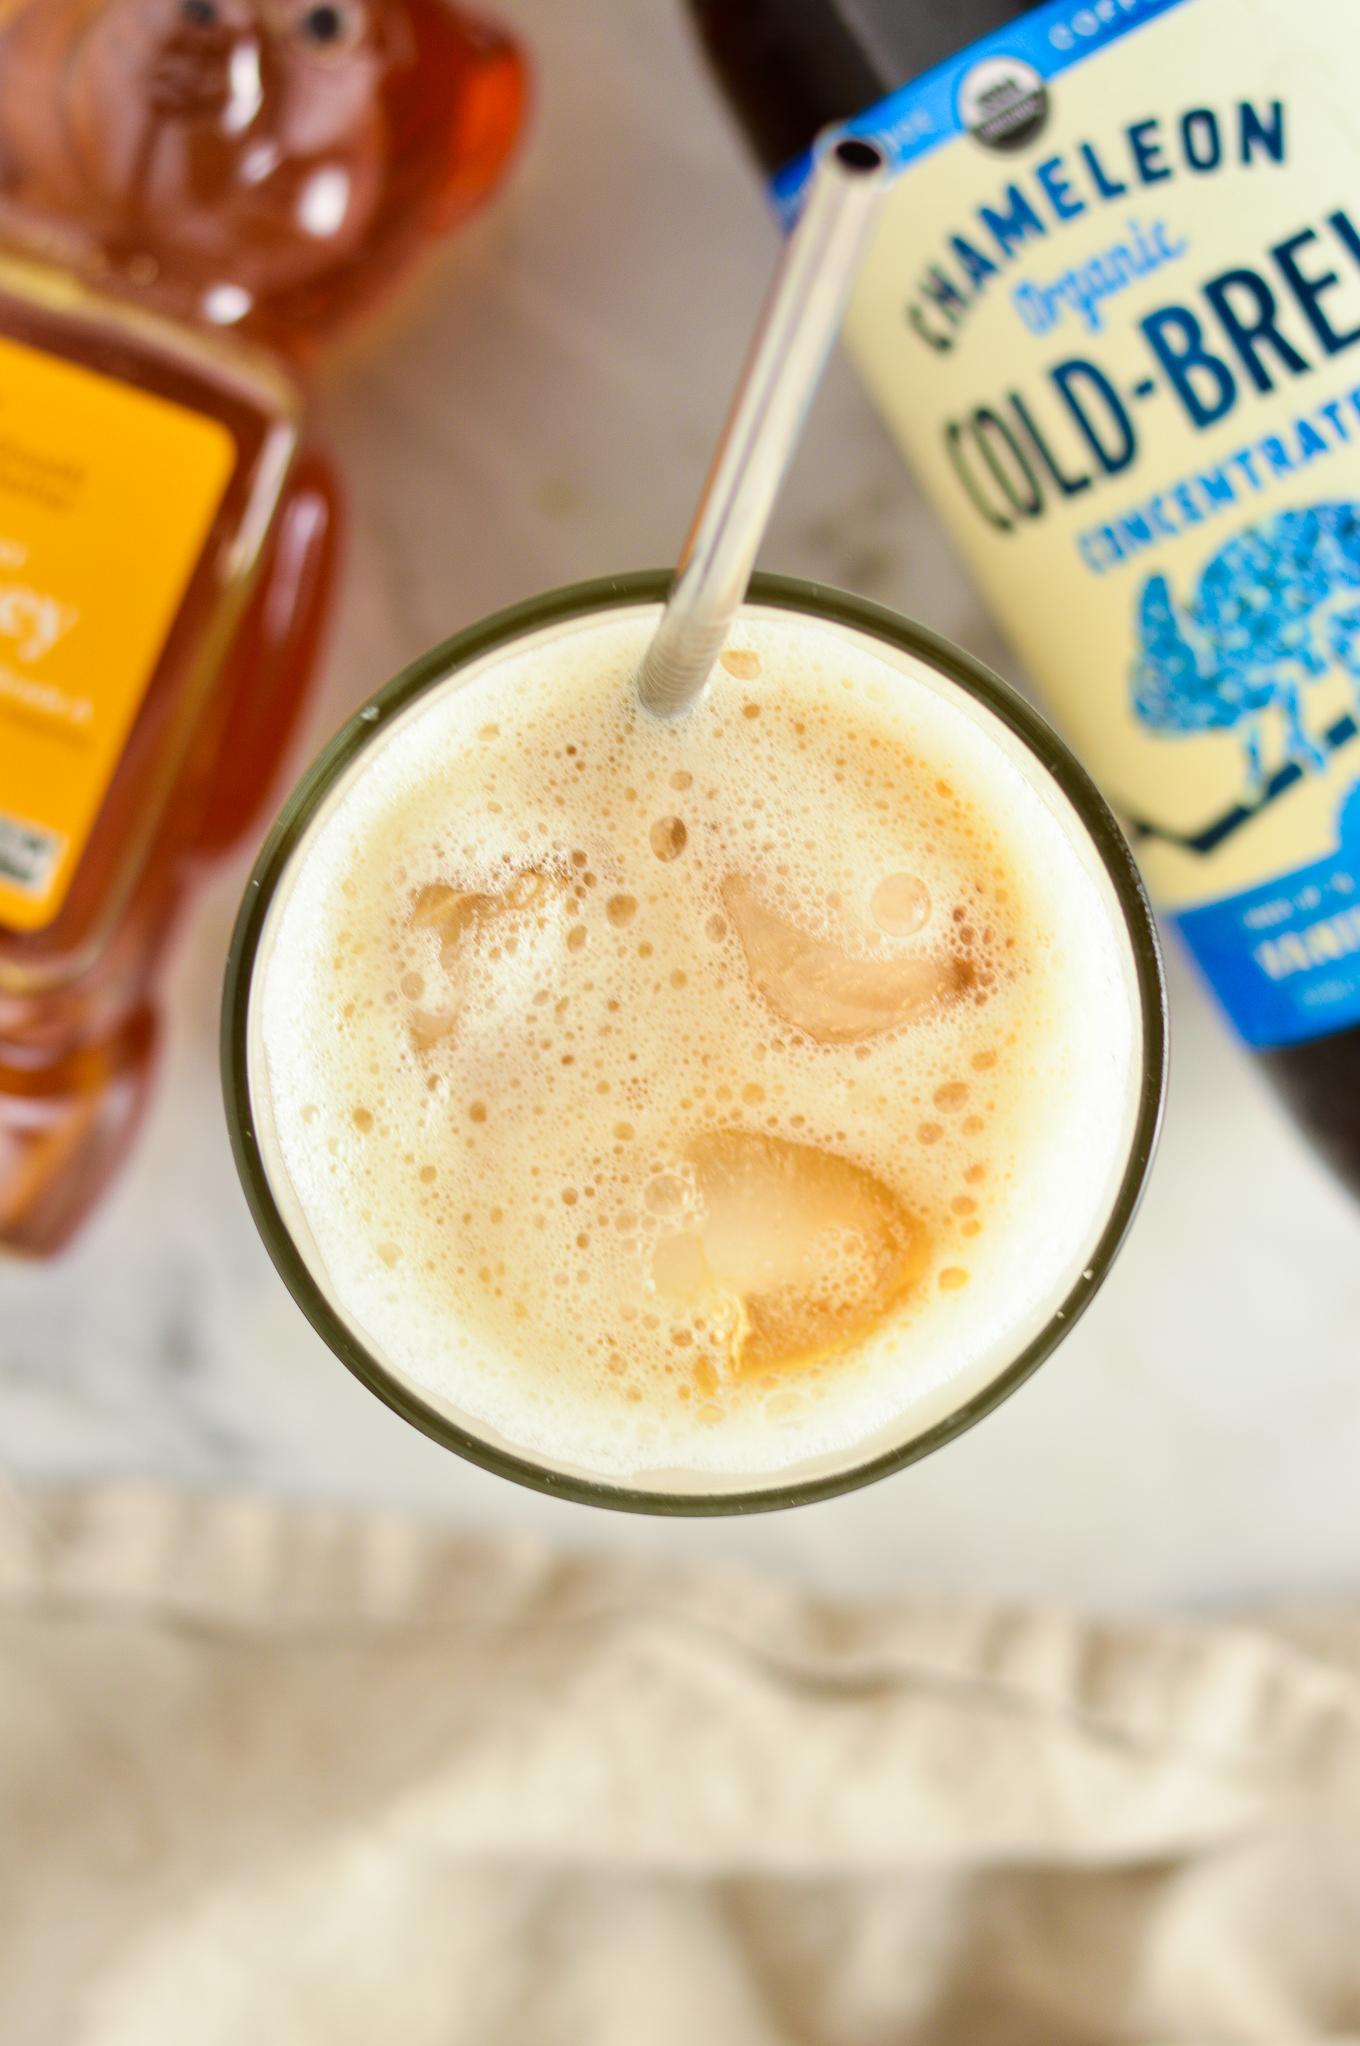  There's nothing like a cool sip of Honey Iced Coffee on a hot summer day.